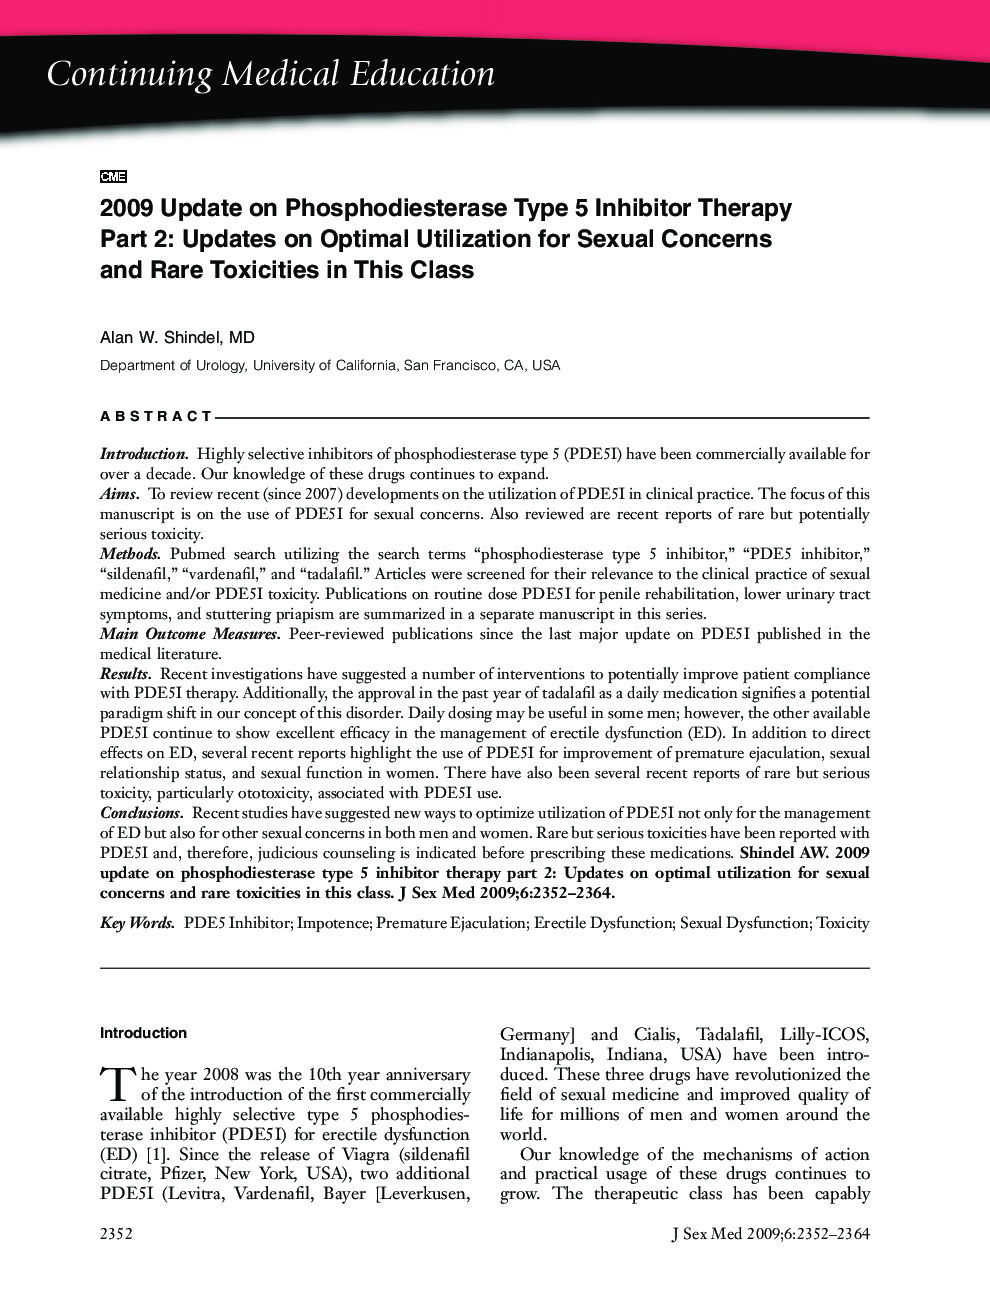 Continuing Medical Education: 2009 Update on Phosphodiesterase Type 5 Inhibitor Therapy Part 2: Updates on Optimal Utilization for Sexual Concerns and Rare Toxicities in This Class (CME)